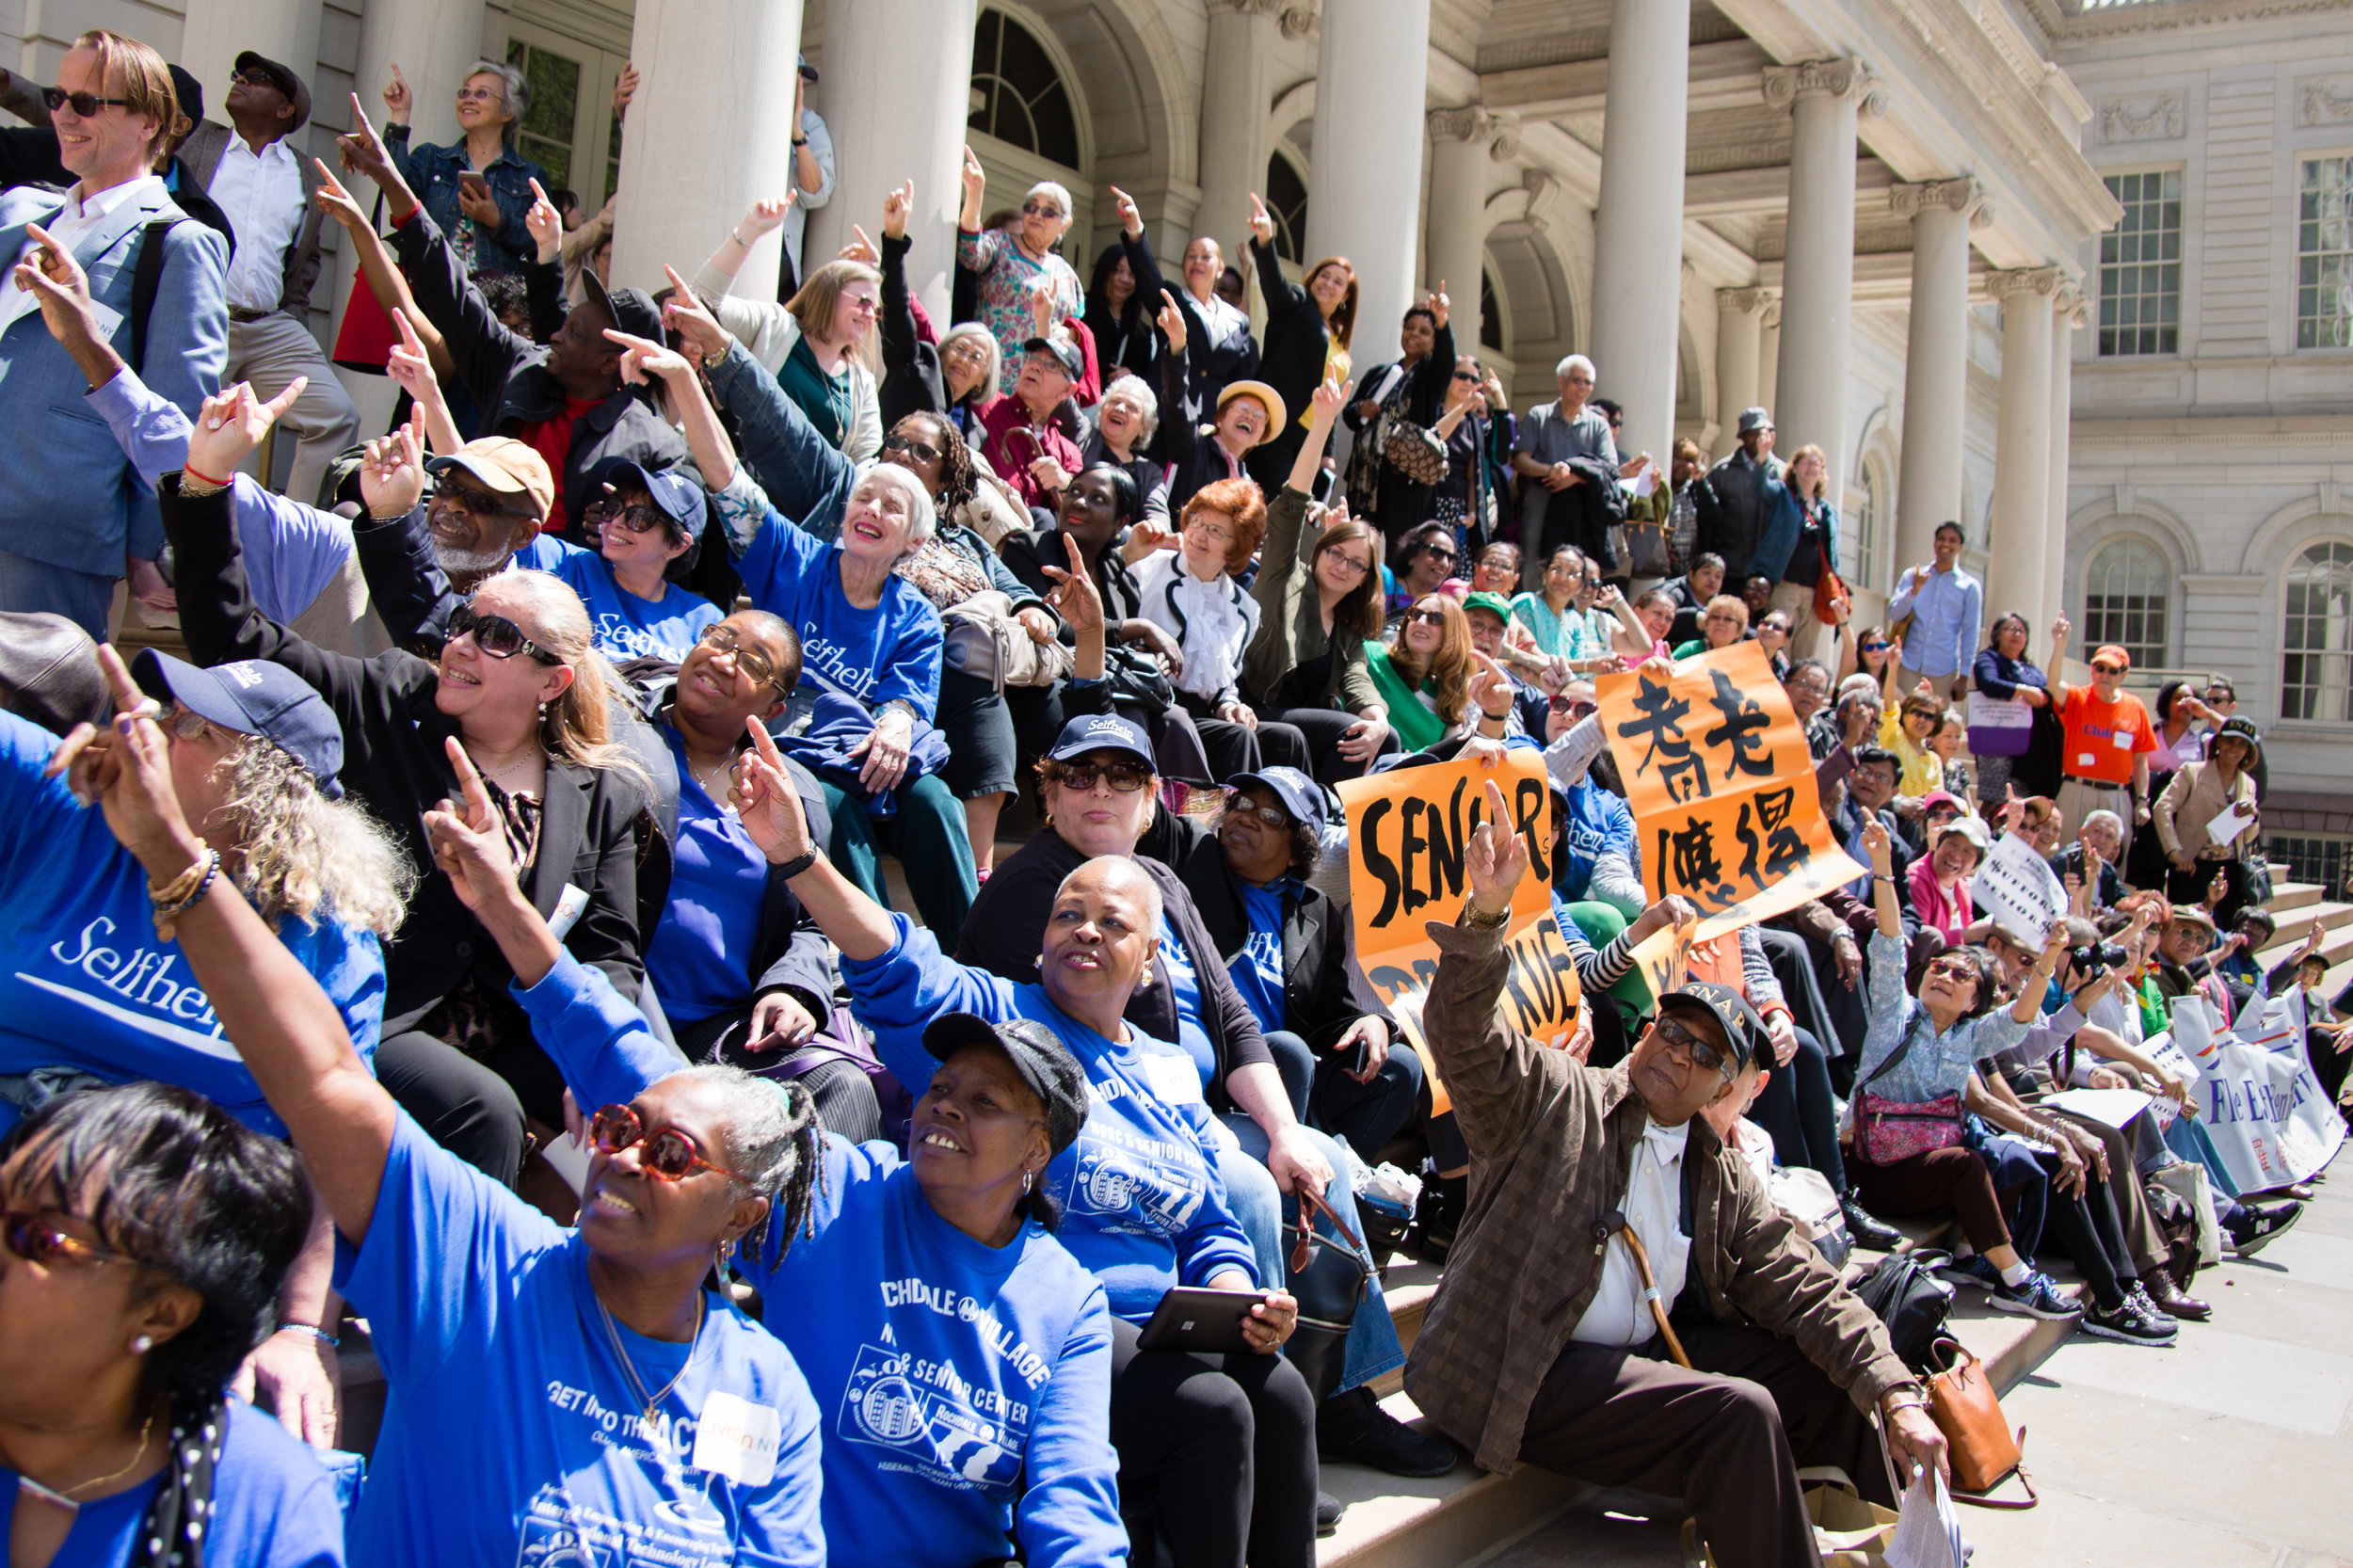 Seniors Point to the Mayor's Office, Calling for Investments